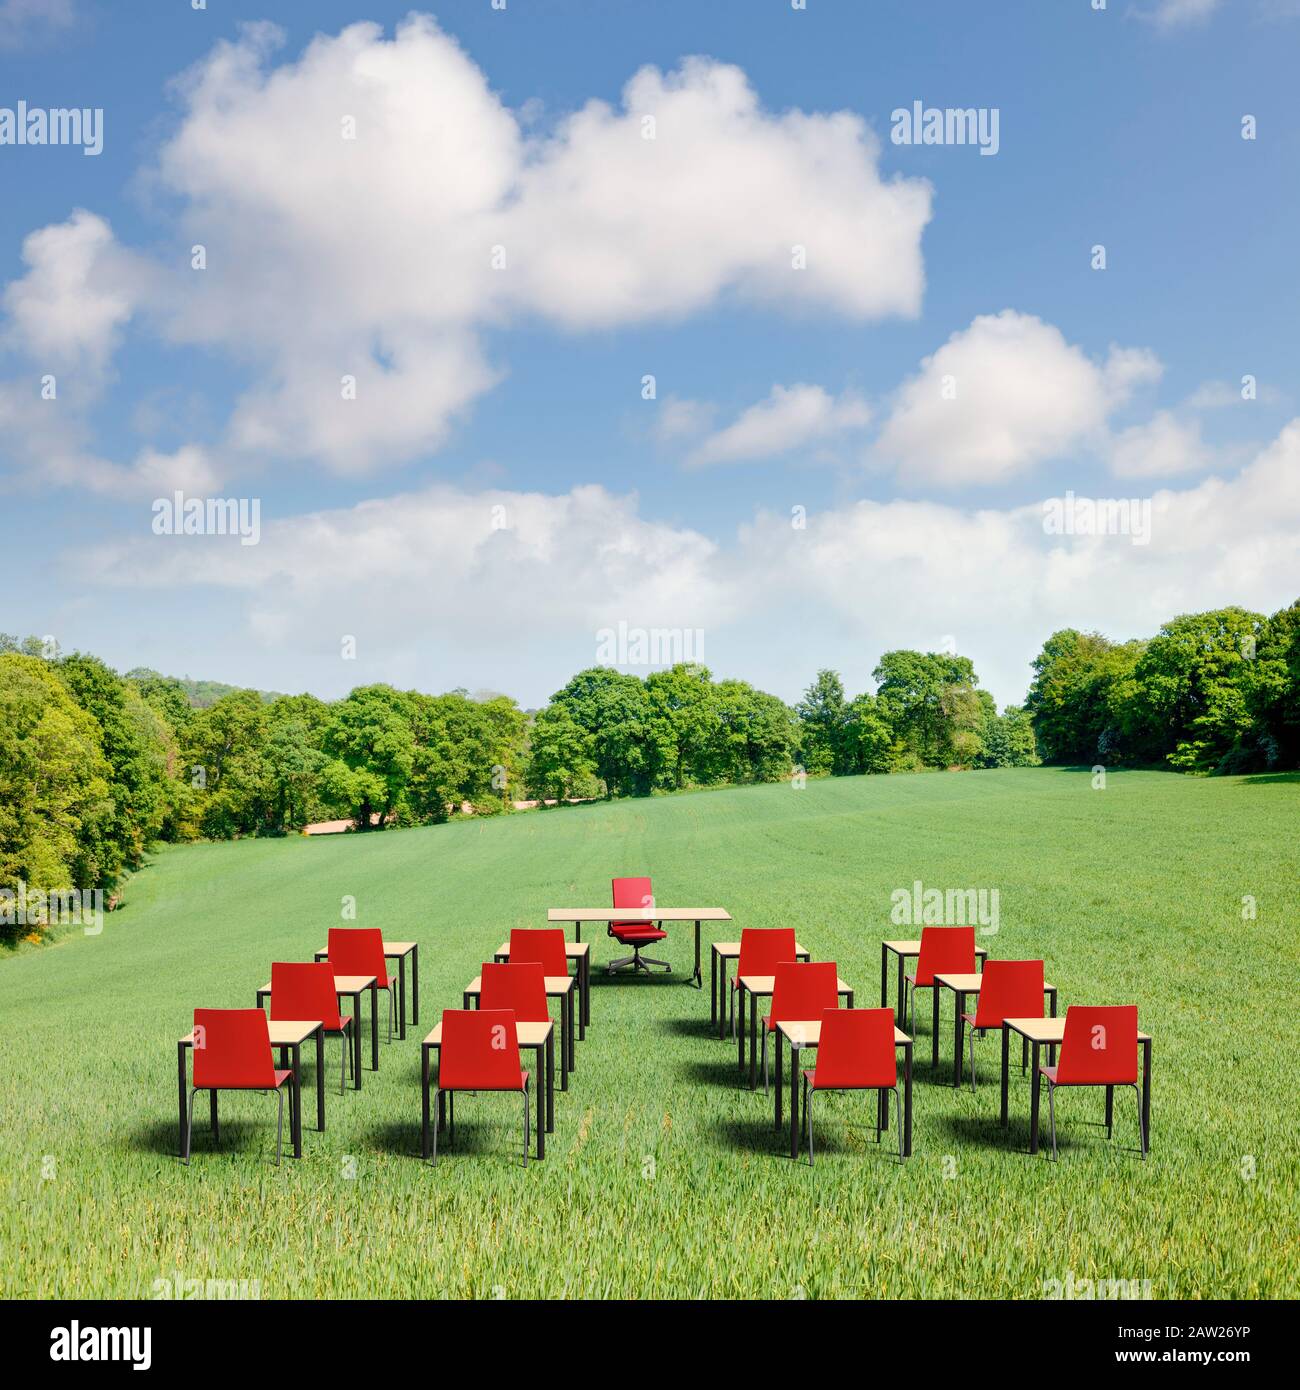 An outdoor school class in the open air with desks and chairs in a green field Stock Photo